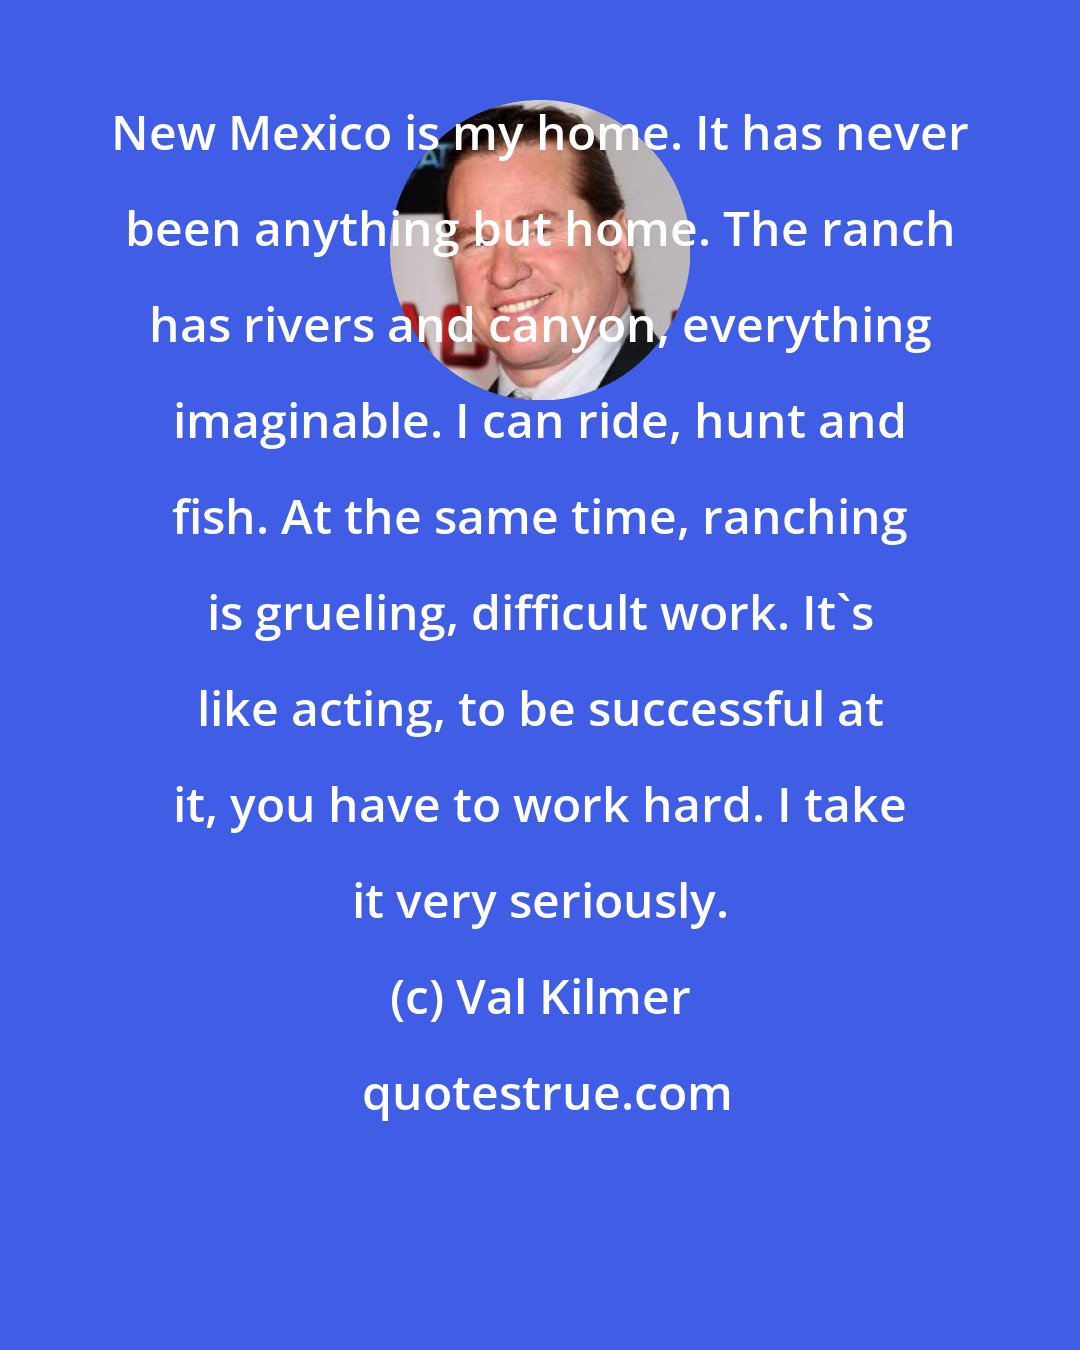 Val Kilmer: New Mexico is my home. It has never been anything but home. The ranch has rivers and canyon, everything imaginable. I can ride, hunt and fish. At the same time, ranching is grueling, difficult work. It`s like acting, to be successful at it, you have to work hard. I take it very seriously.